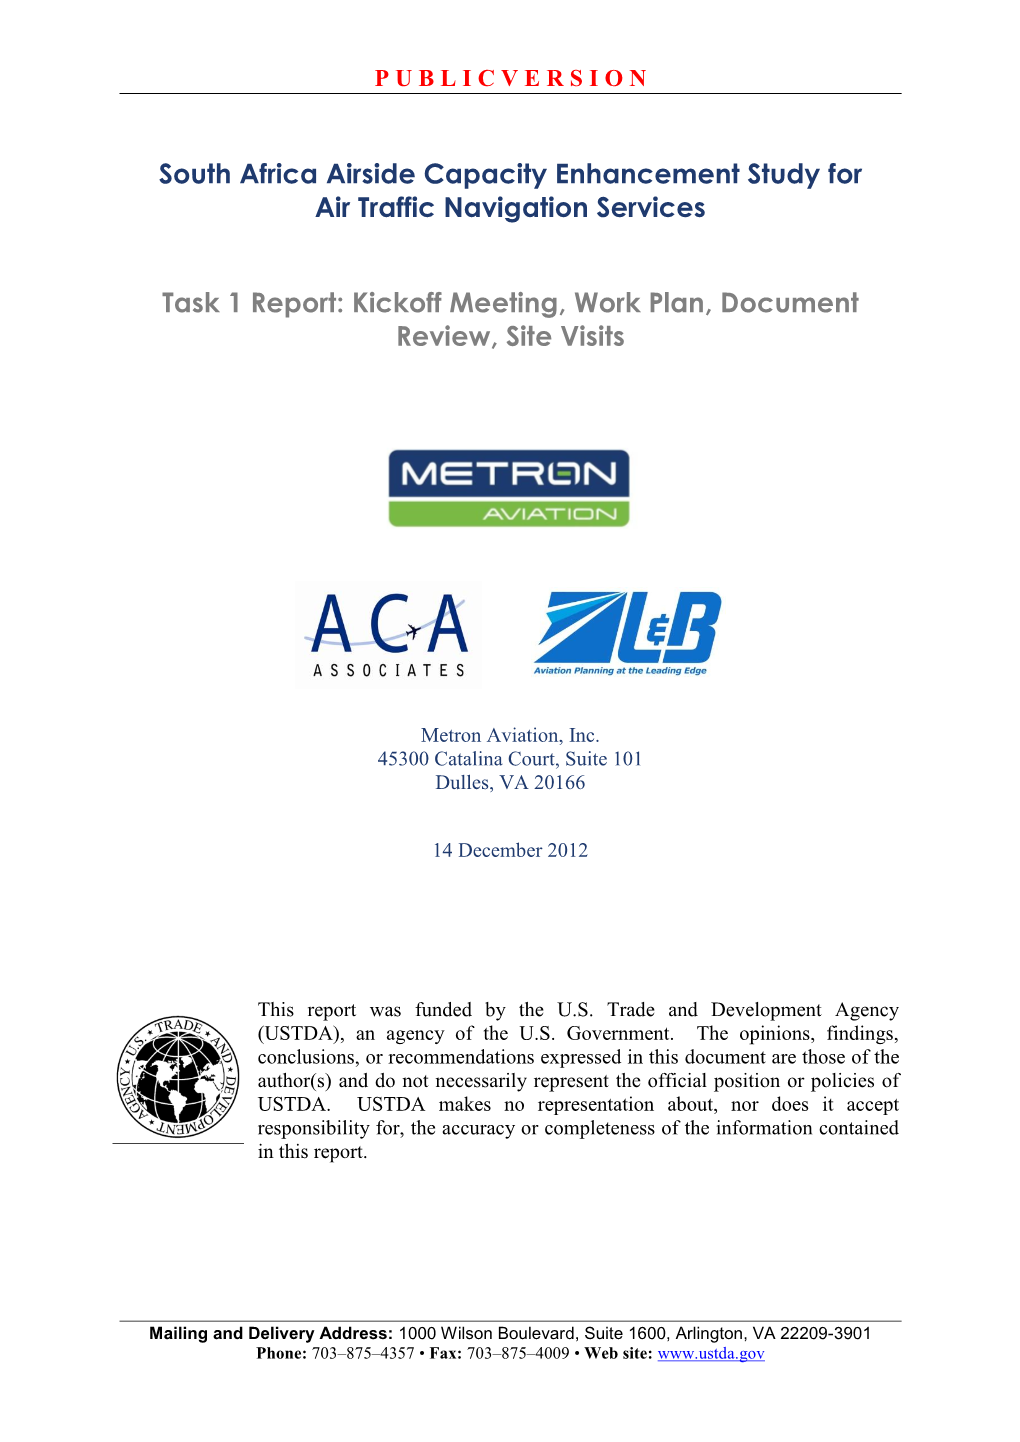 South Africa Airside Capacity Enhancement Study for Air Traffic Navigation Services